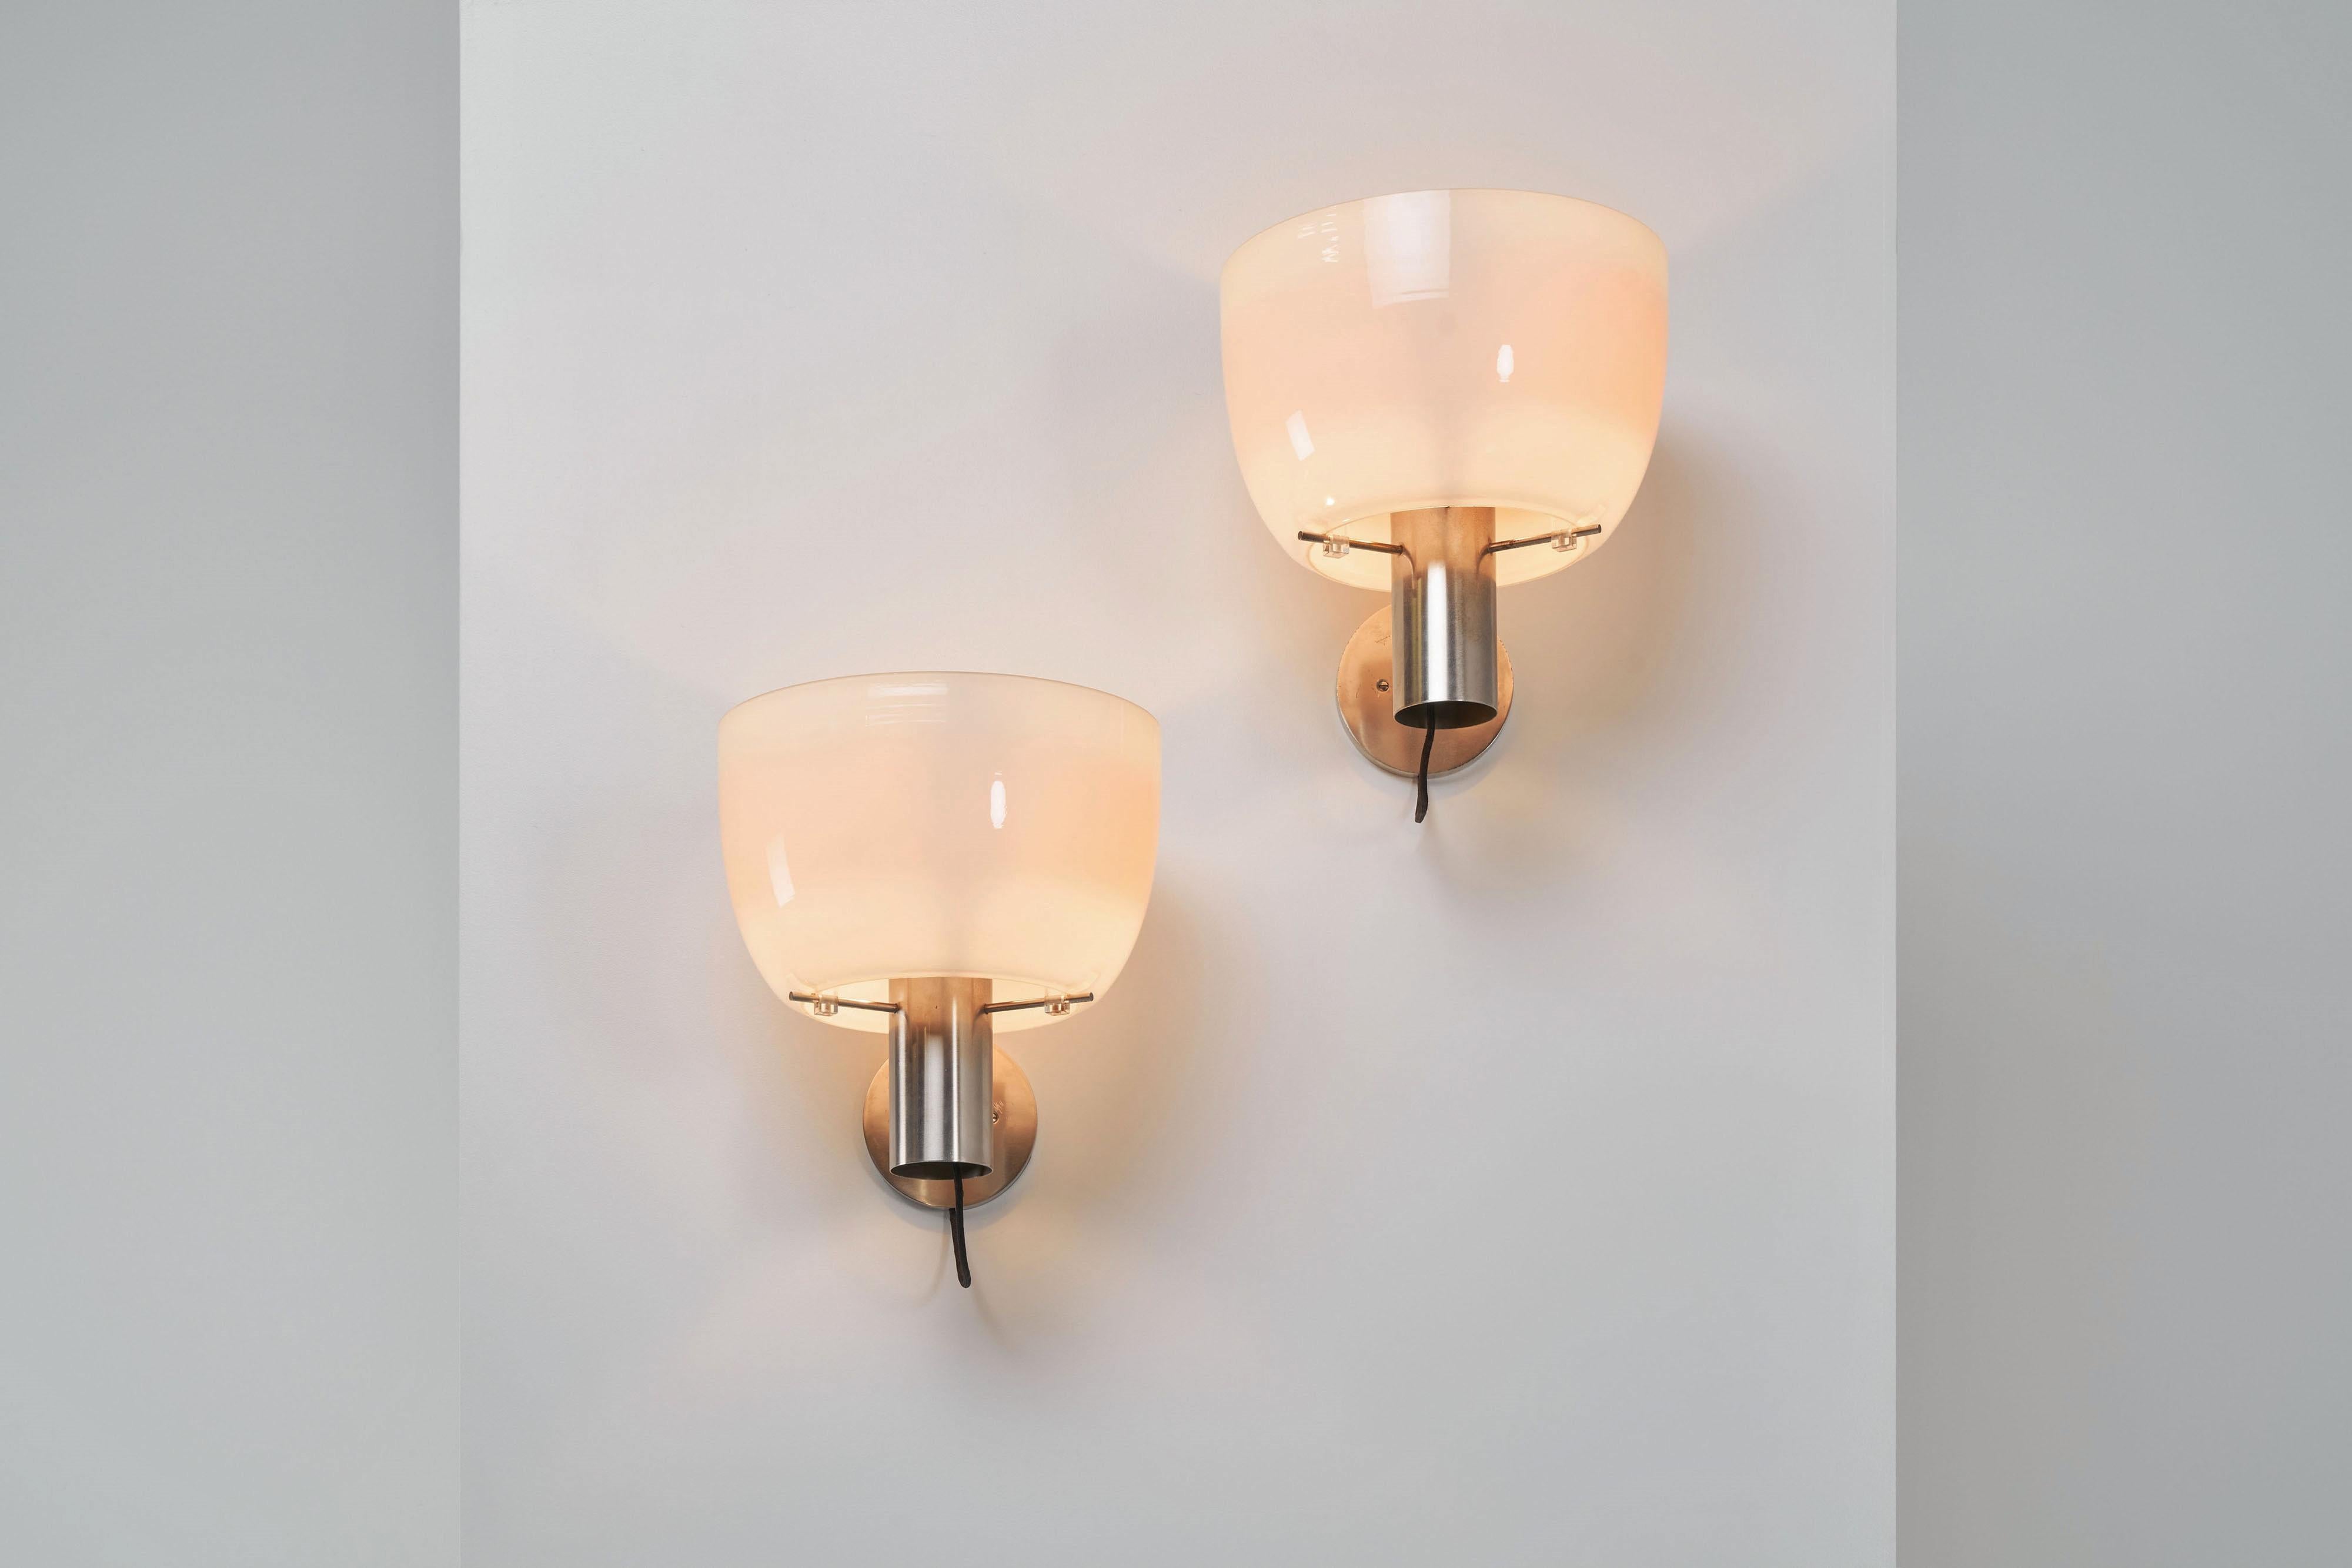 Rare big pair of wall lamps model 1121 designed by Giuseppe Ostuni and Renato Forti and manufactured by Oluce, Italy 1955. These minimalistic but very technical executed wall lamps have matt nickel-plated tructures, and they have a white blown glass